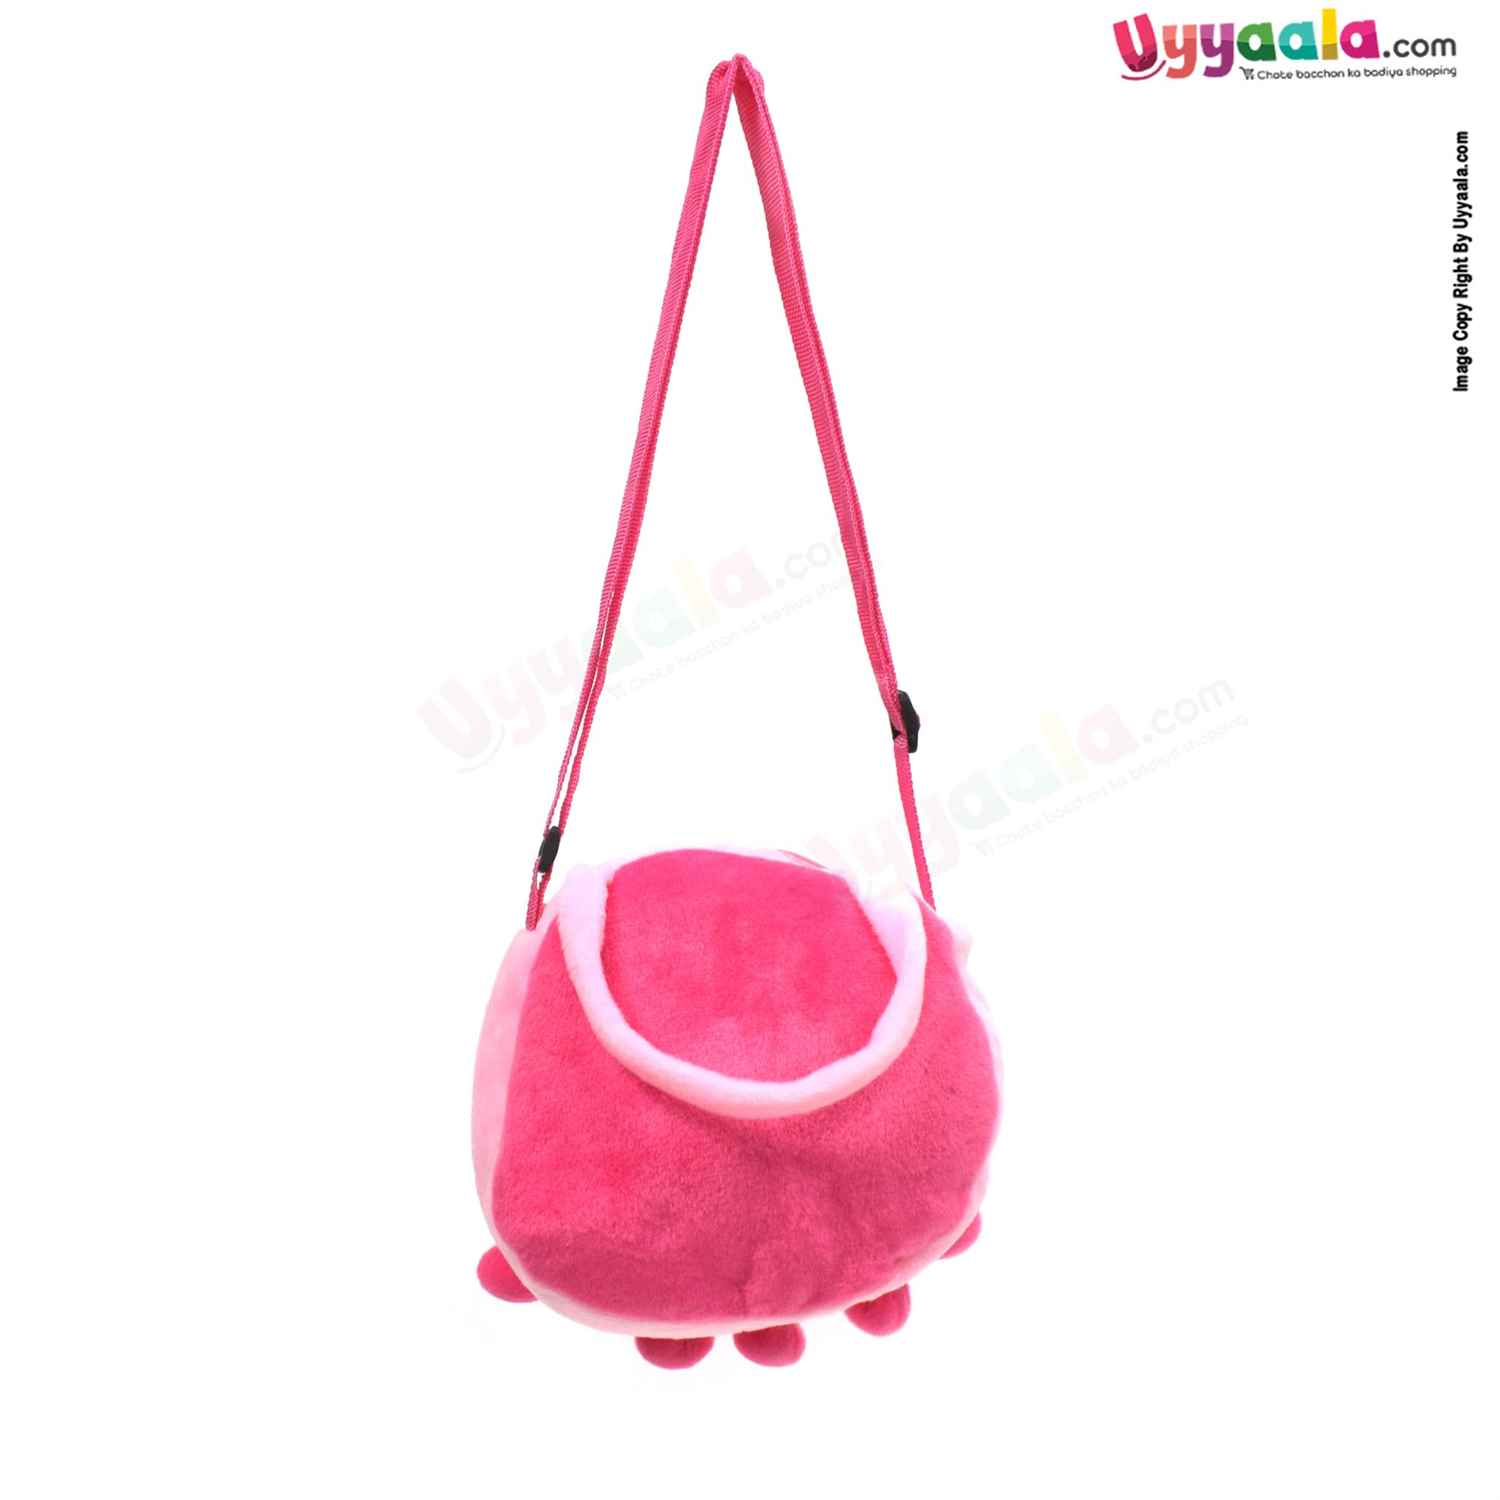 Hand bag for kids with caterpillar theme